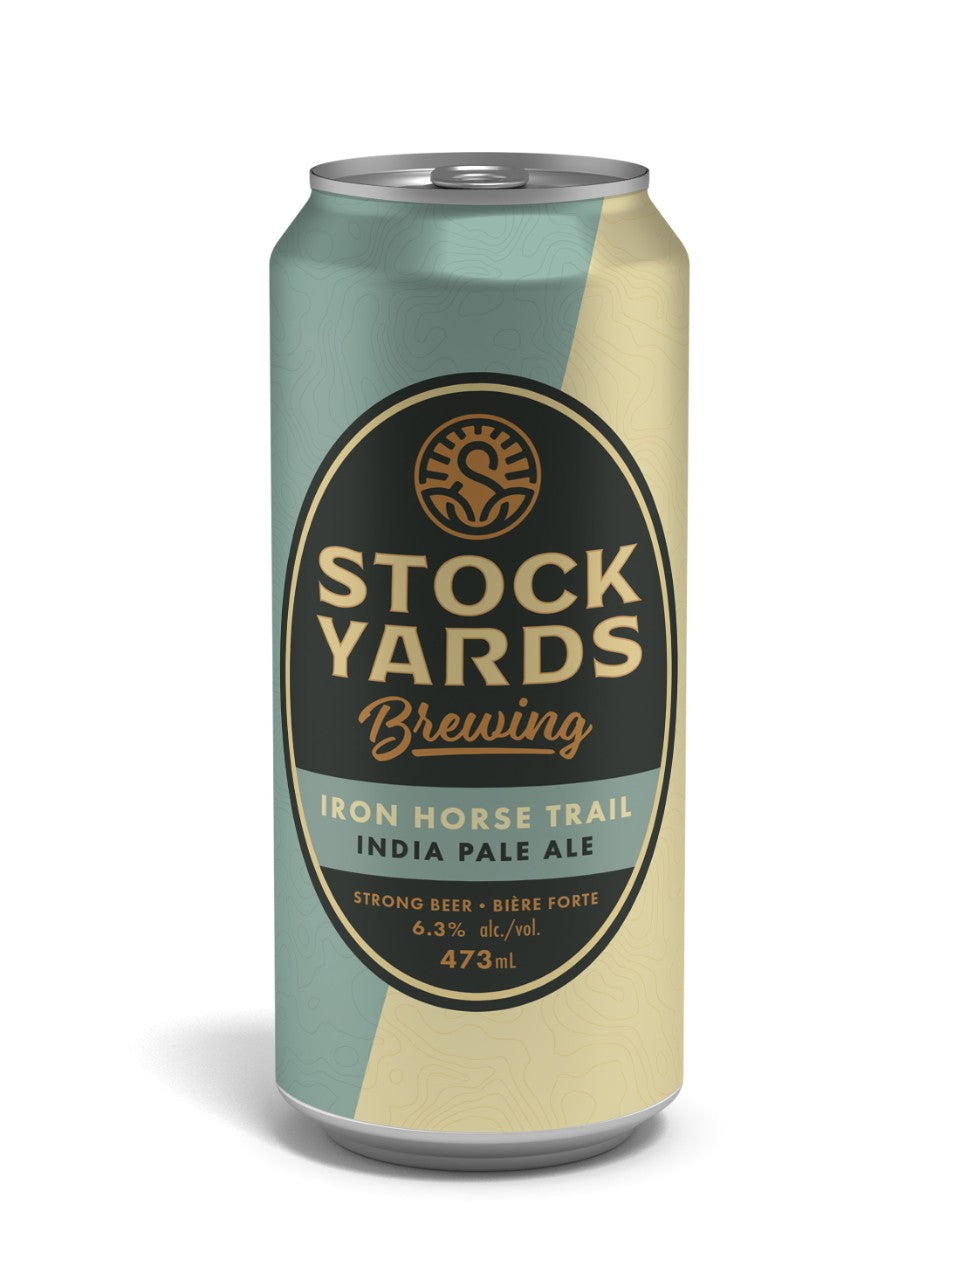 Stockyards Brewing Iron Horse Trail IPA  473 mL can